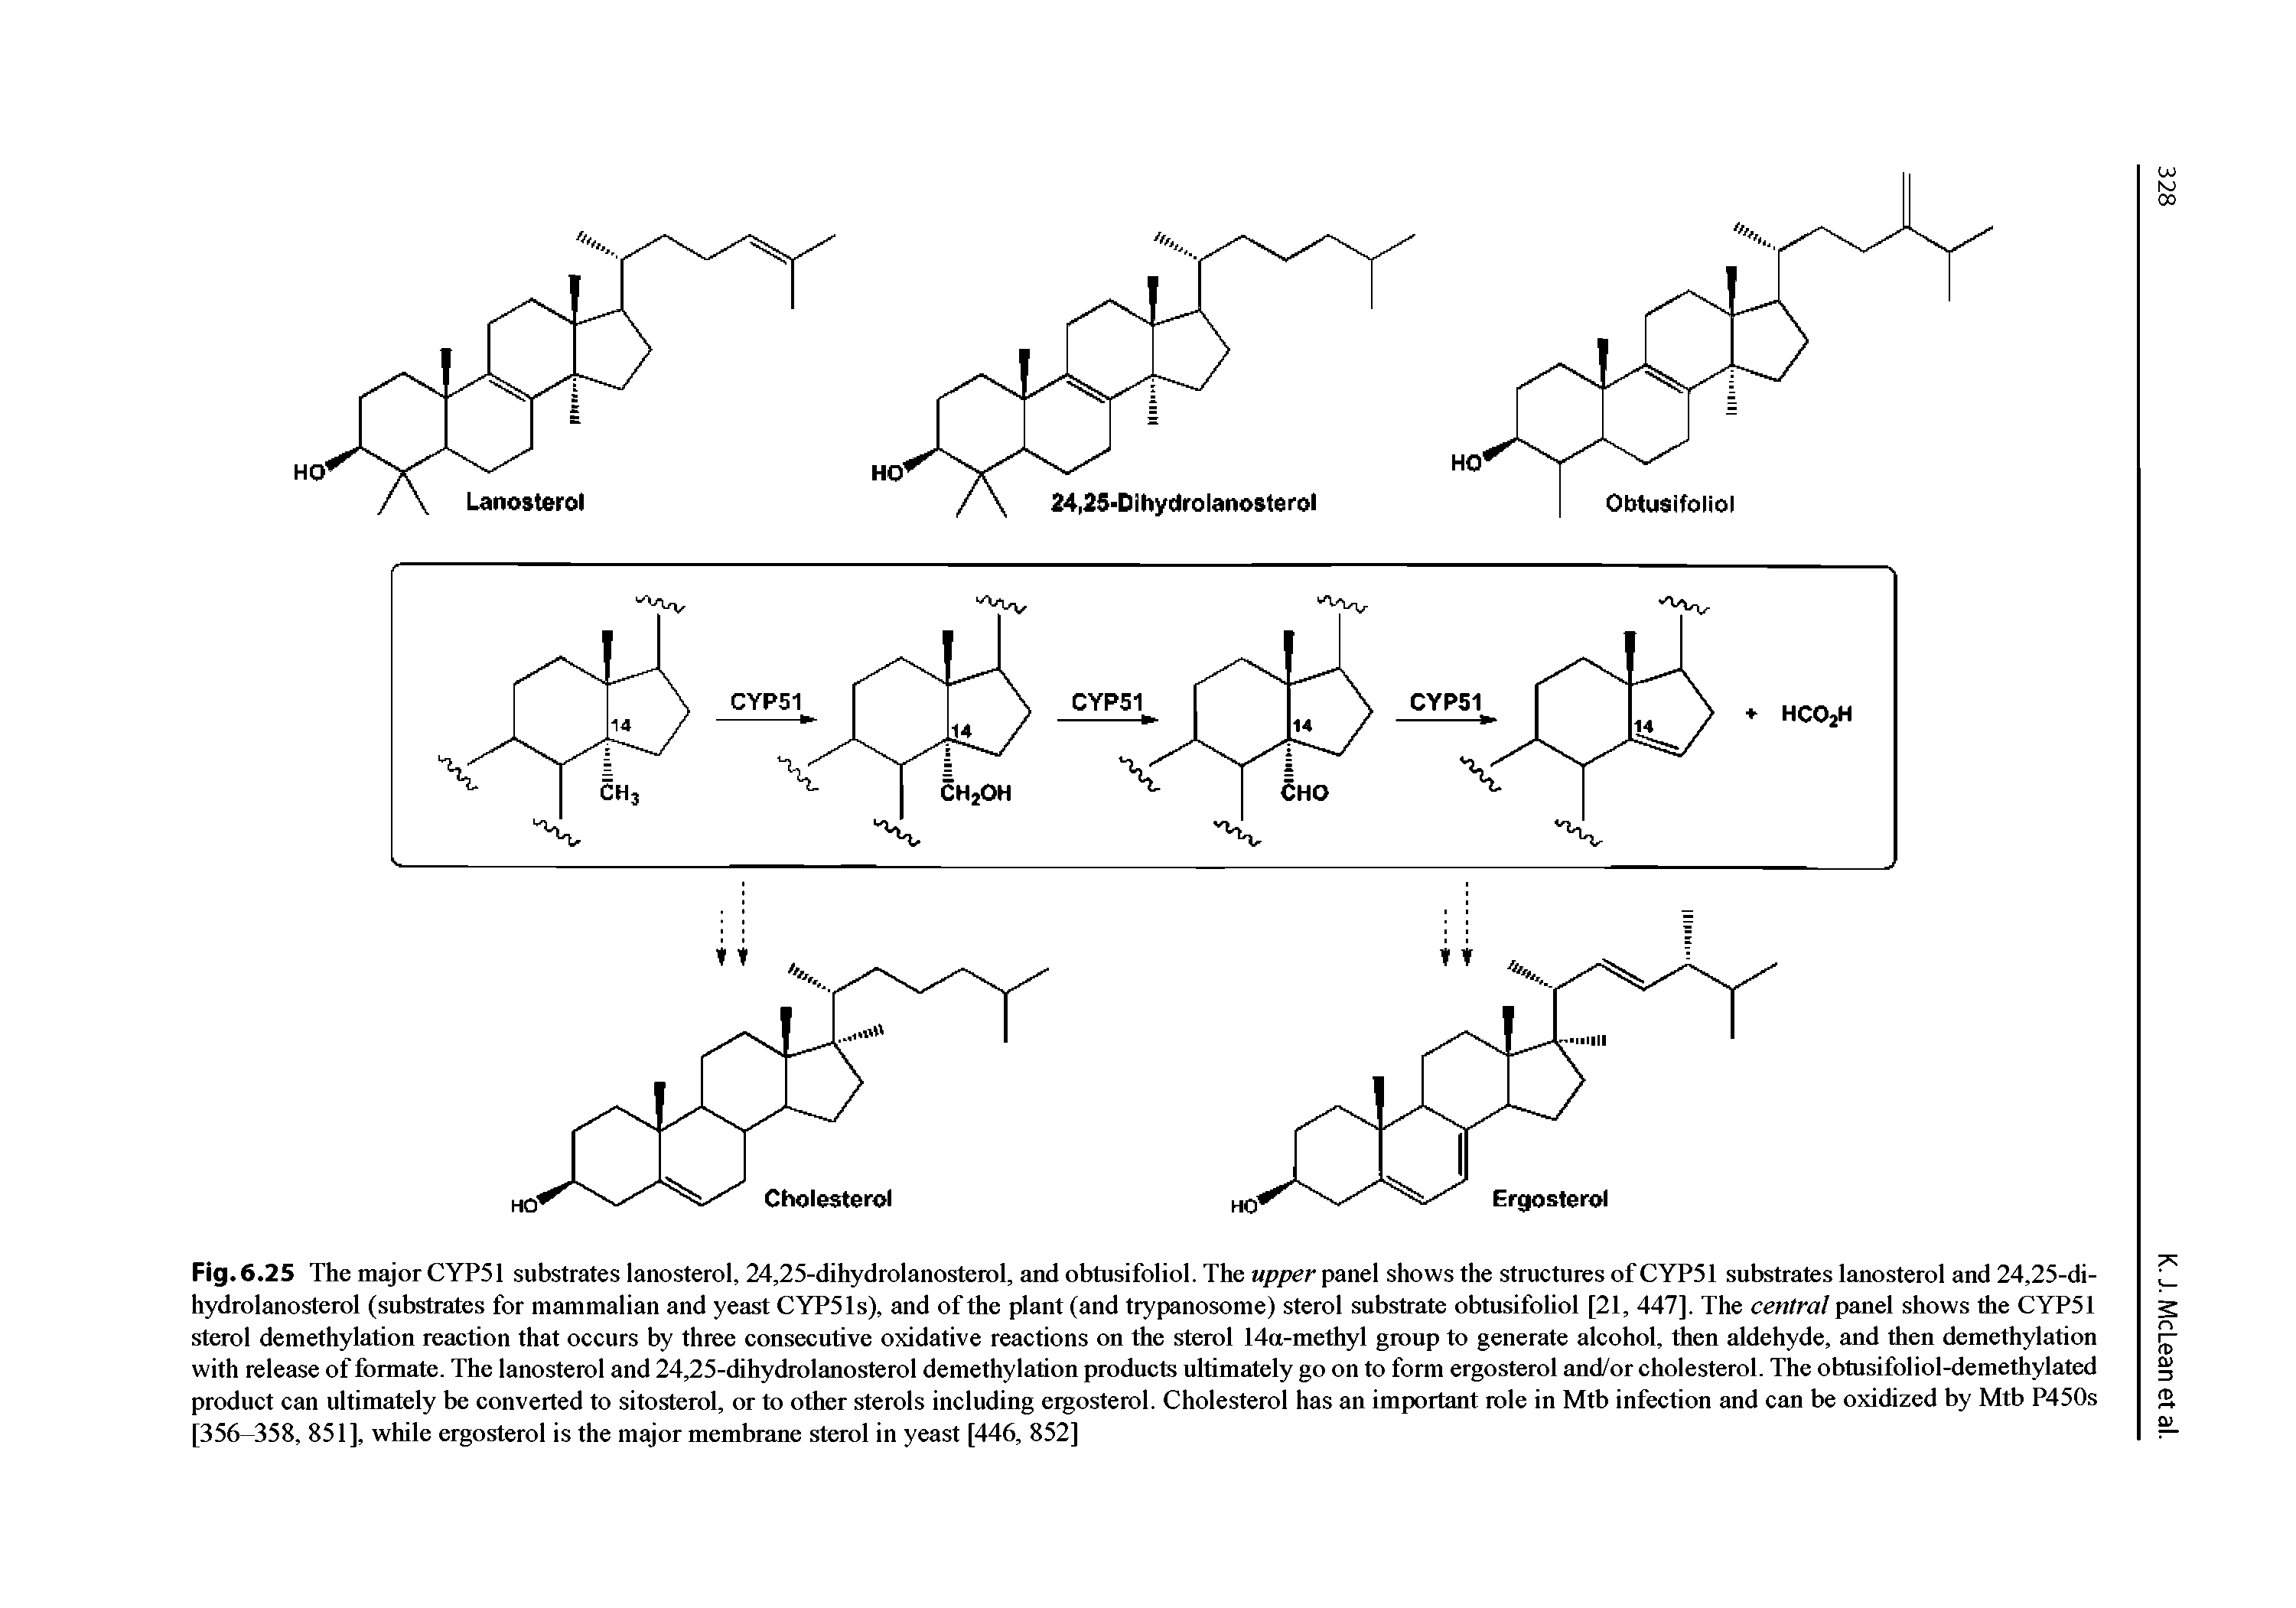 Fig. 6. 25 The major CYP51 substrates lanosterol, 24,25-dihydrolanosterol, and obtusifoliol. The upper panel shows the structures of CYP51 substrates lanosterol and 24,25-di-hydrolanosterol (substrates for mammalian and yeast CYPSls), and of the plant (and trypanosome) sterol substrate obtusifoliol [21, 447], The central panel shows the CYP51 sterol demethylation reaction that occurs by three consecutive oxidative reactions on the sterol 14a-methyl group to generate alcohol, then aldehyde, and then demethylation with release of formate. The lanosterol and 24,25-dihydrolanosterol demethylation products ultimately go on to form ergosterol and/or cholesterol. The obtusifoliol-demethylated product can ultimately be converted to sitosterol, or to other sterols including ergosterol. Cholesterol has an important role in Mtb infection and can be oxidized by Mtb P450s [356-358, 851], while ergosterol is the major membrane sterol in yeast [446, 852]...